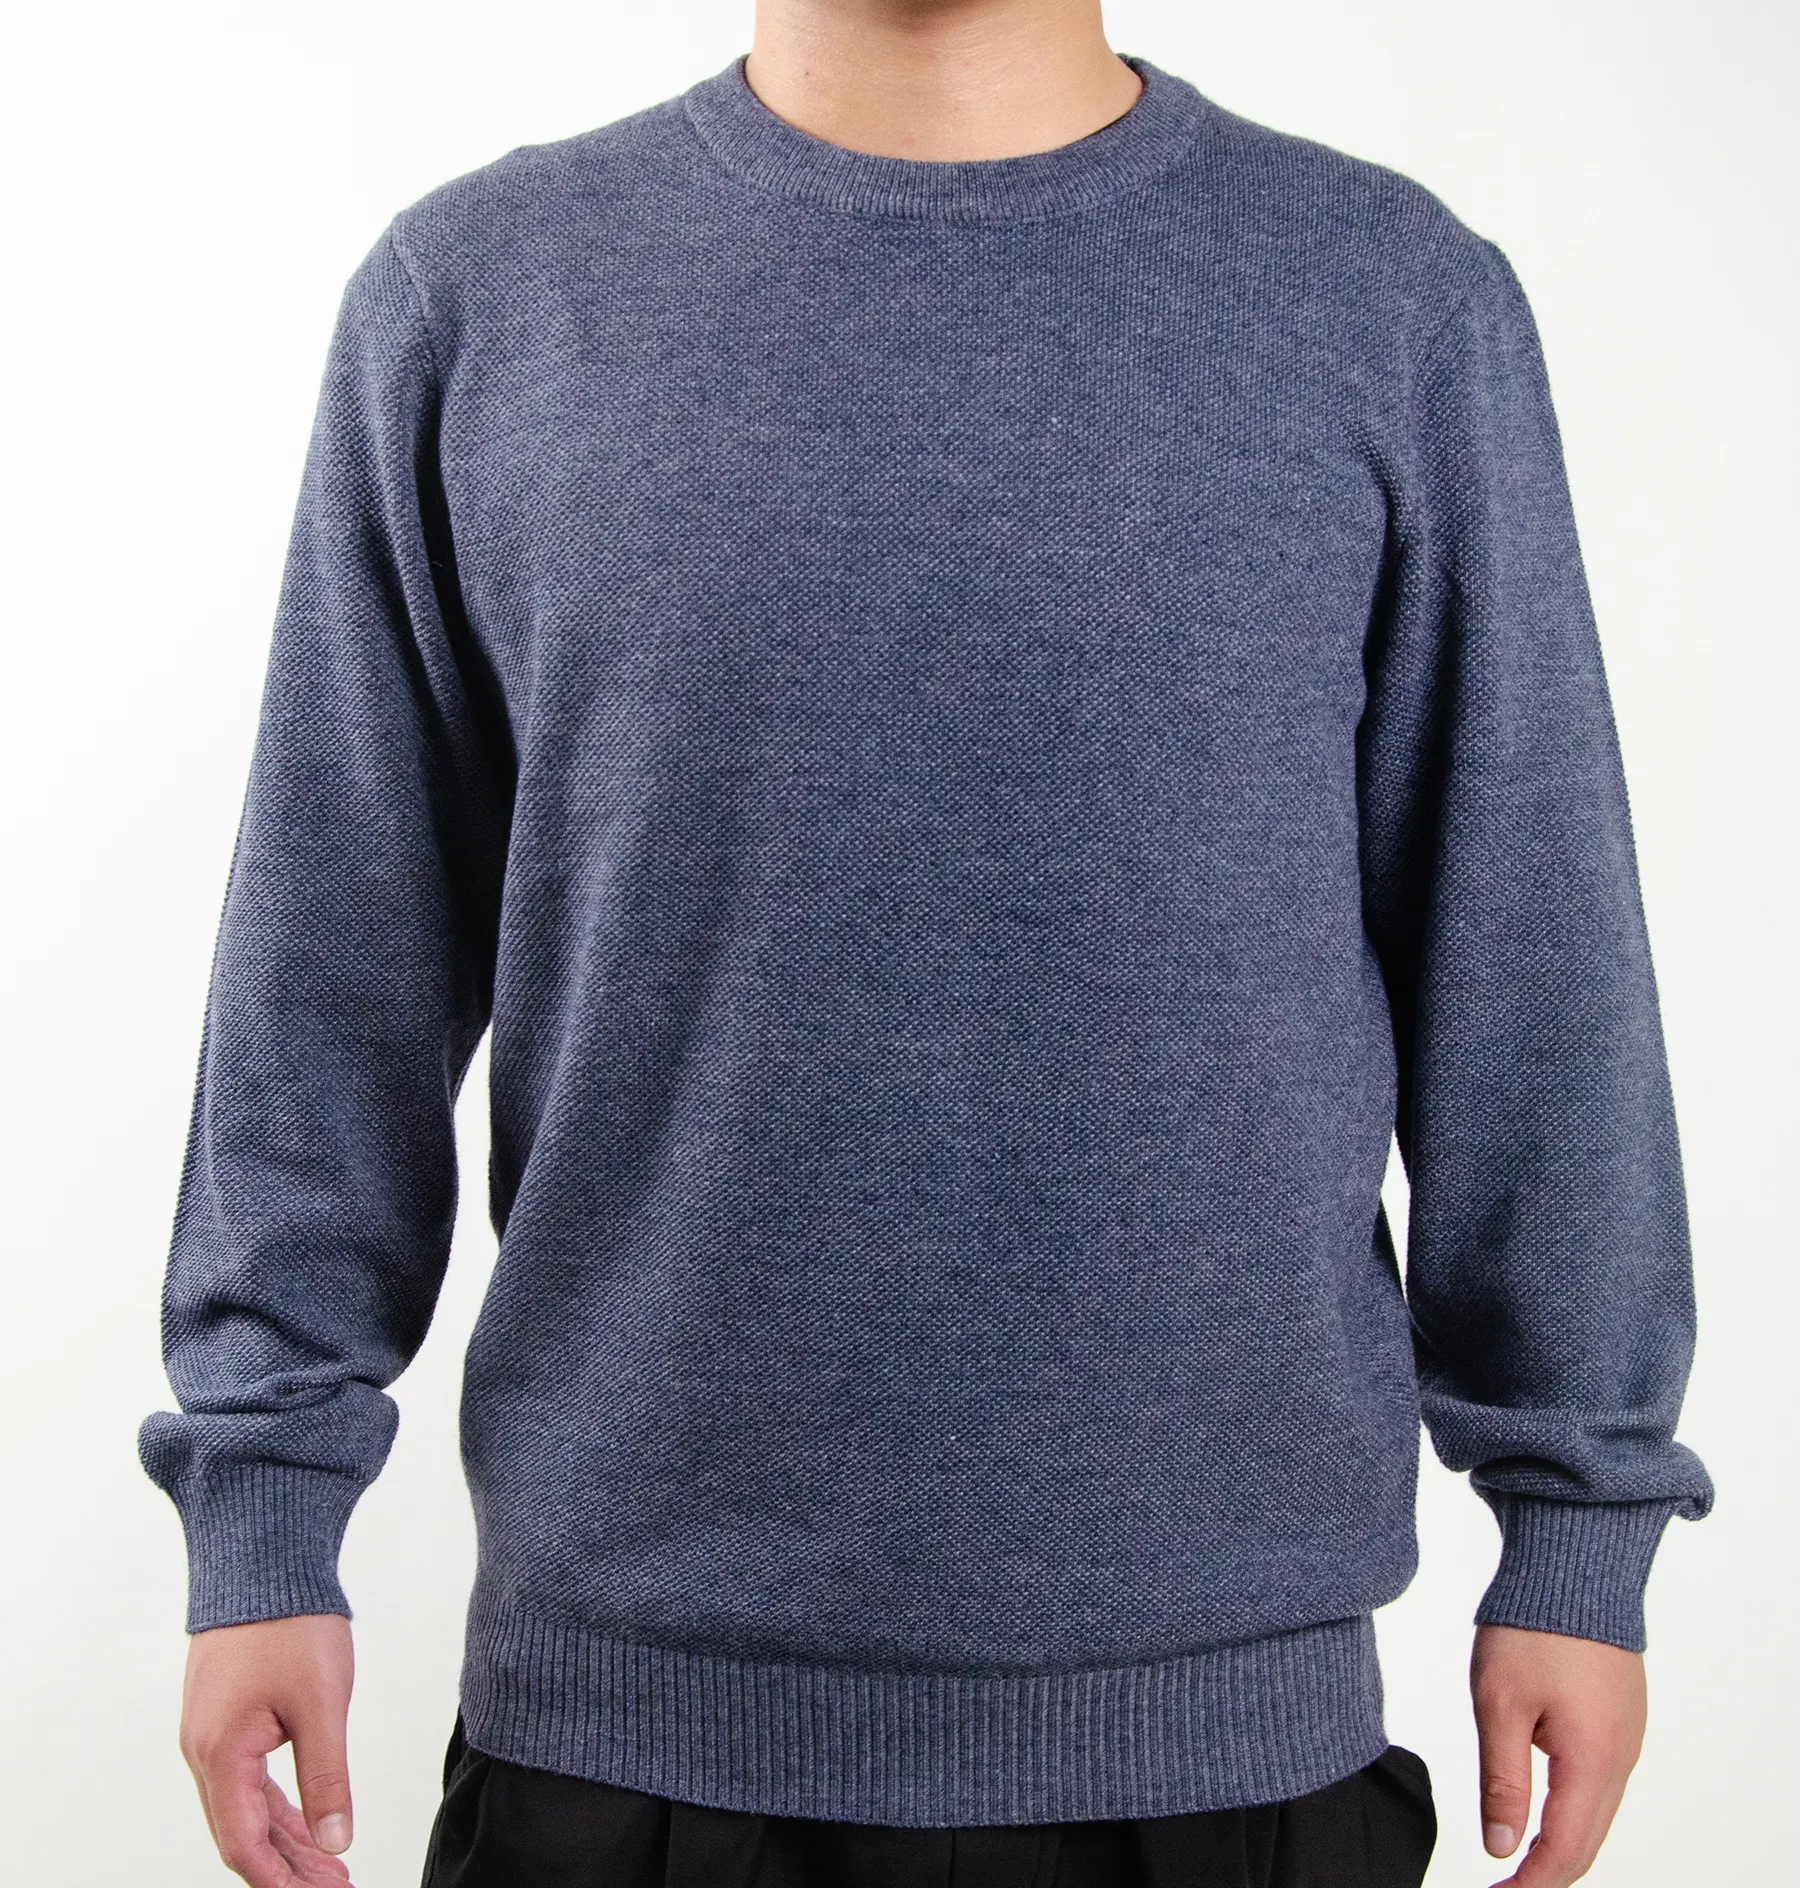 2021 New High Quality Solid Color Leisure Soft Winter Round Neck Long Sleeve Knitted Wool Men's Sweaters